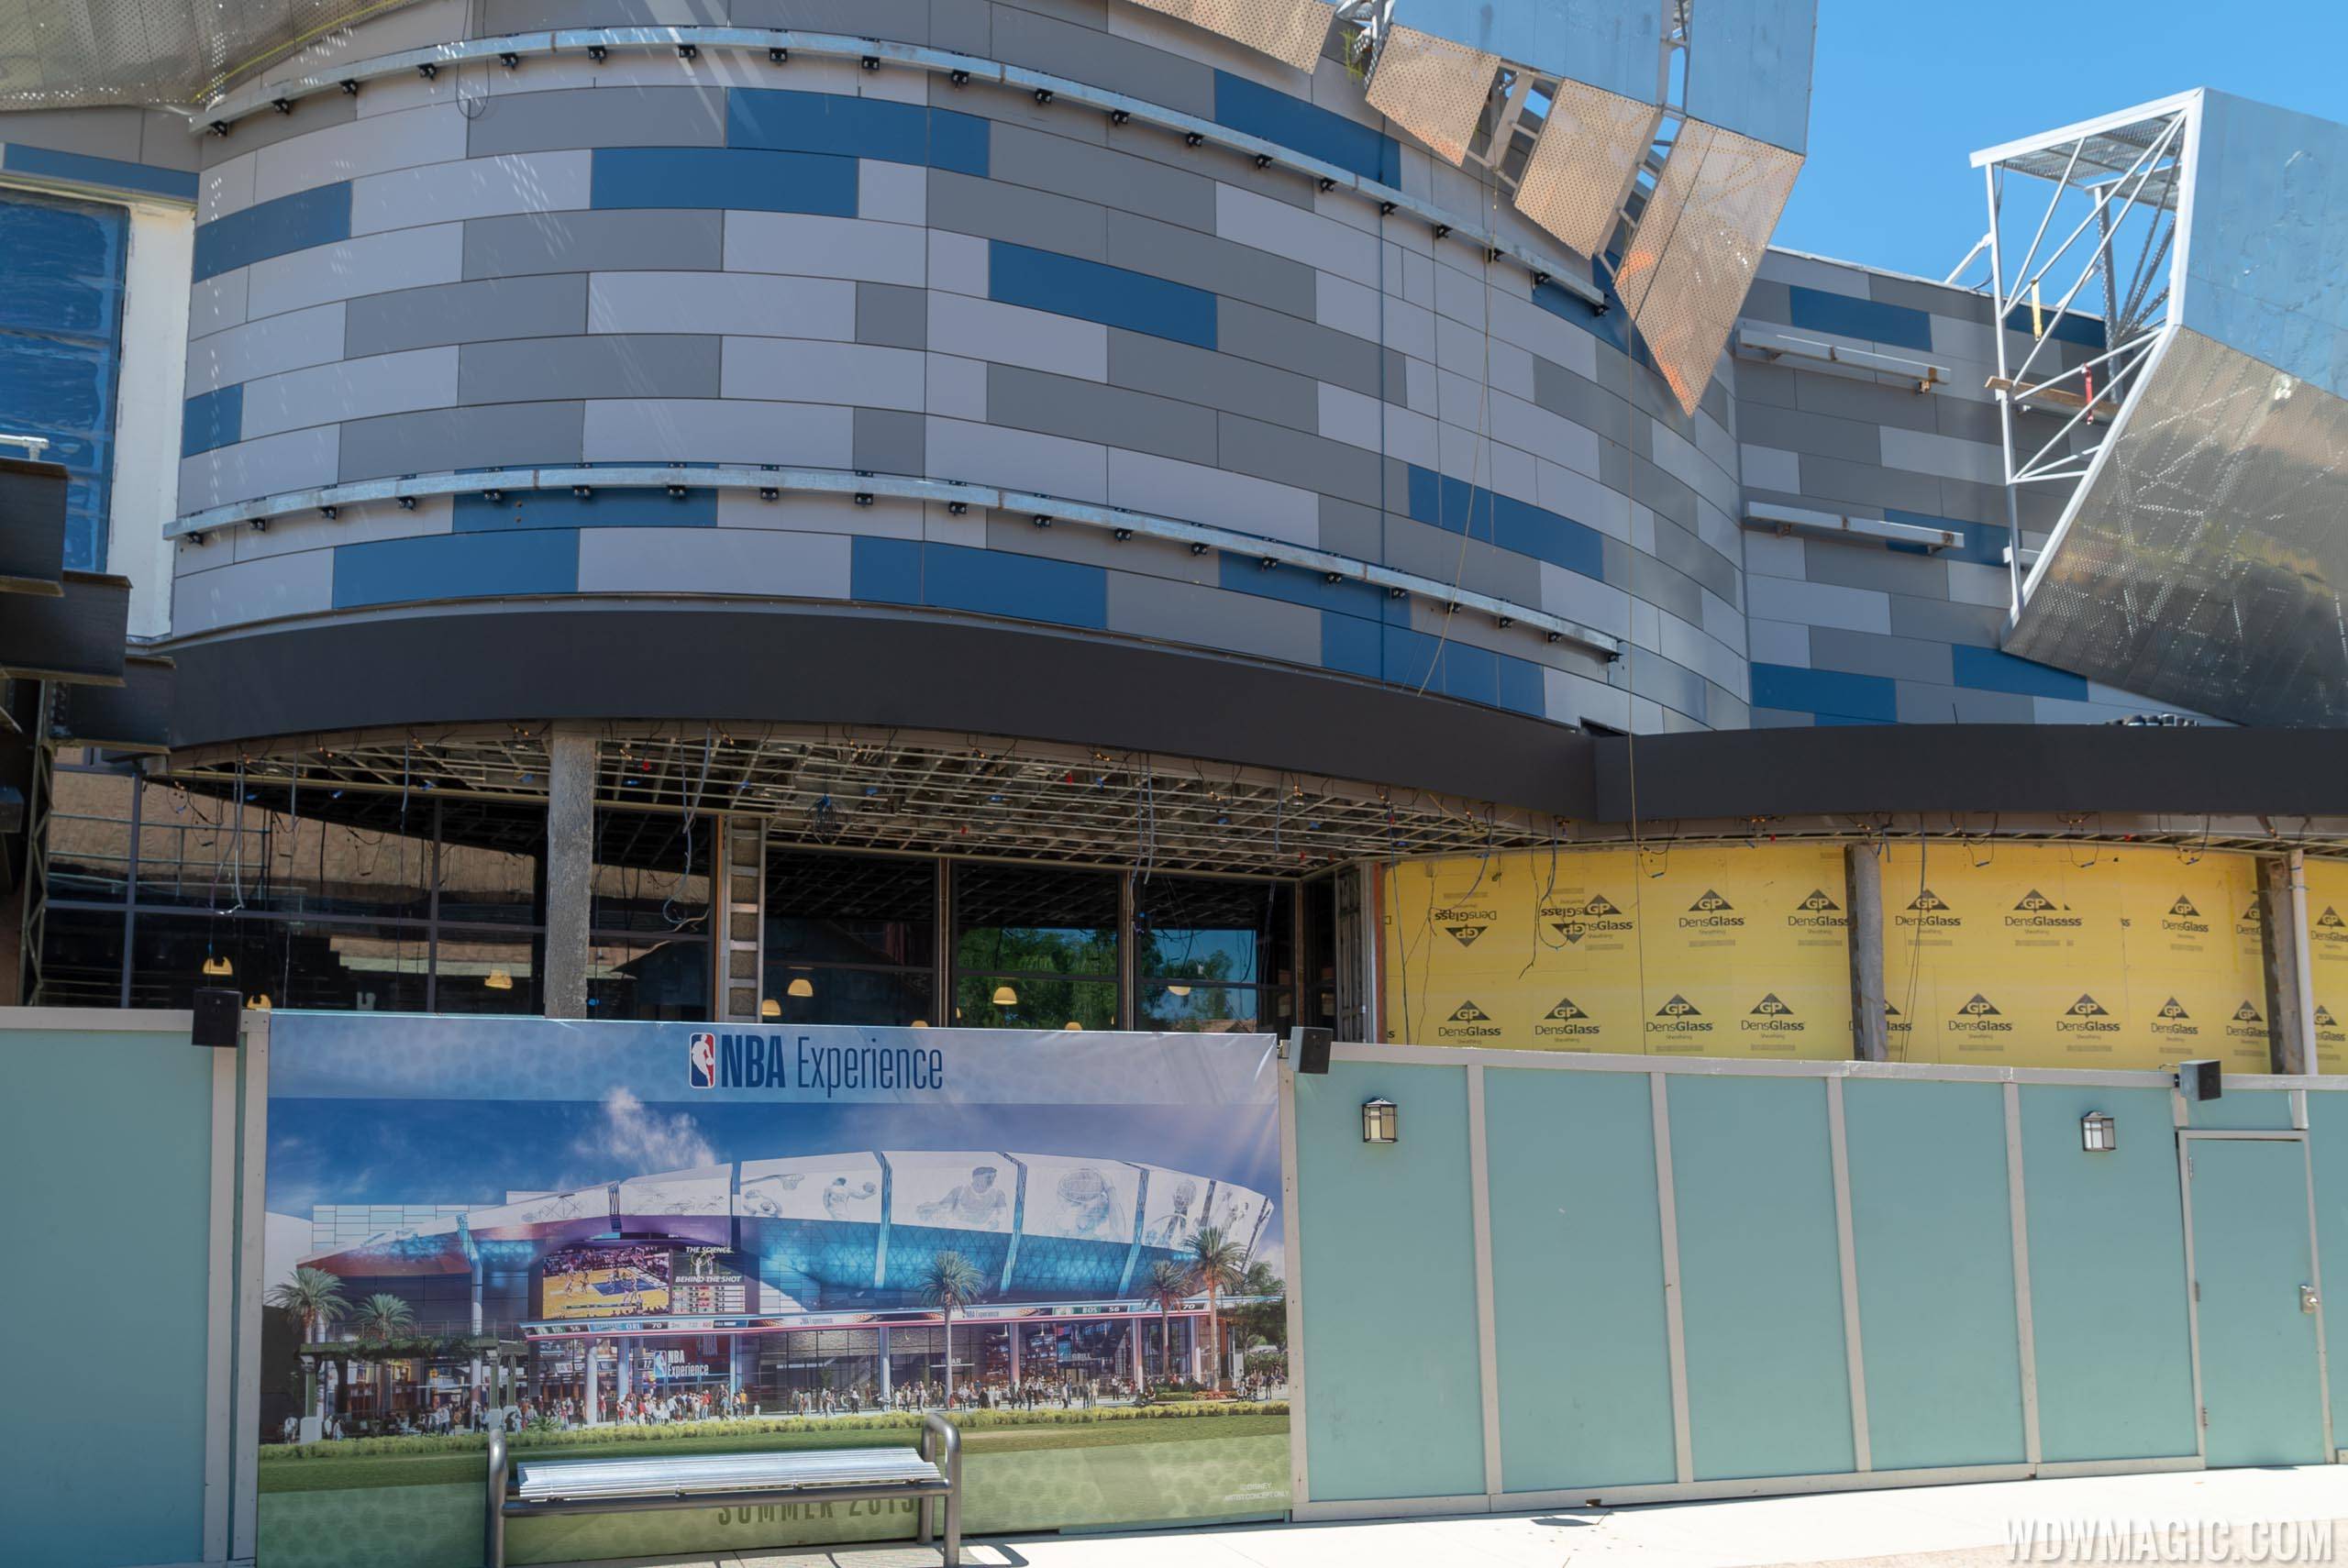 The NBA Experience and City Works construction - April 2019